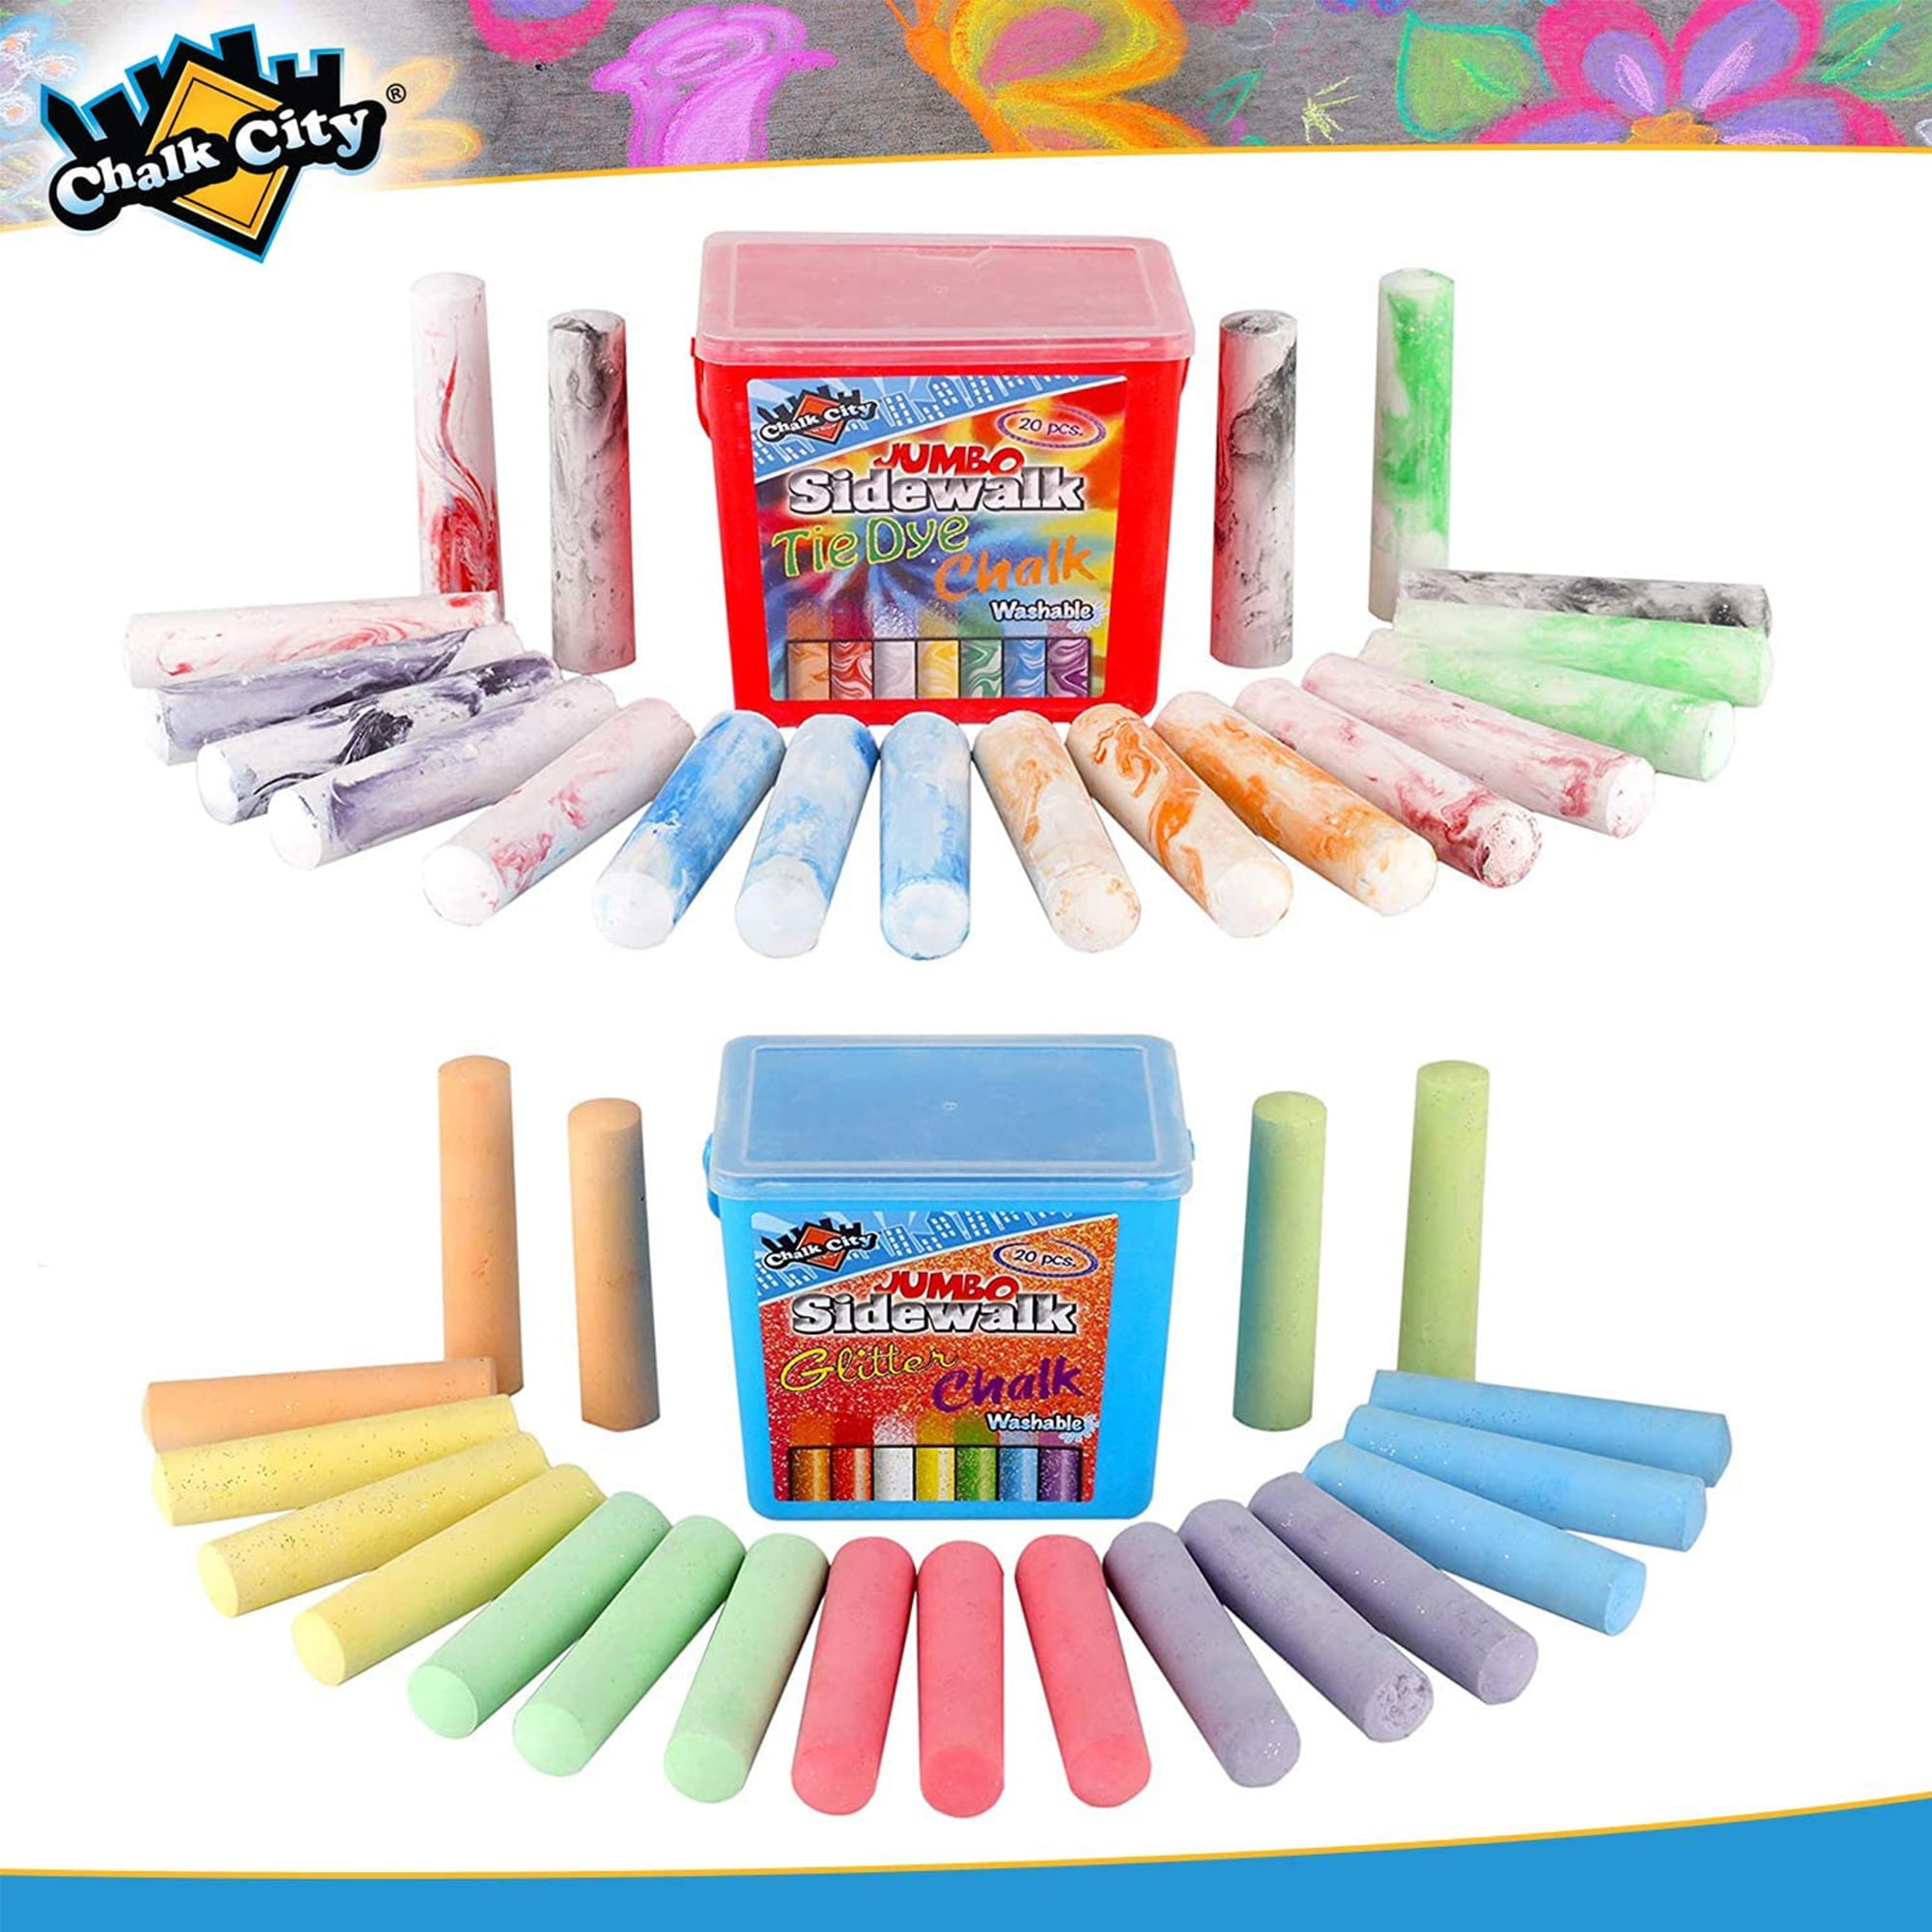 50ct Bucket of Sidewalk Chalk- 8 unique colors- Long lasting Jumbo Sticks,  Non-Toxic, Bright and Bold Colors